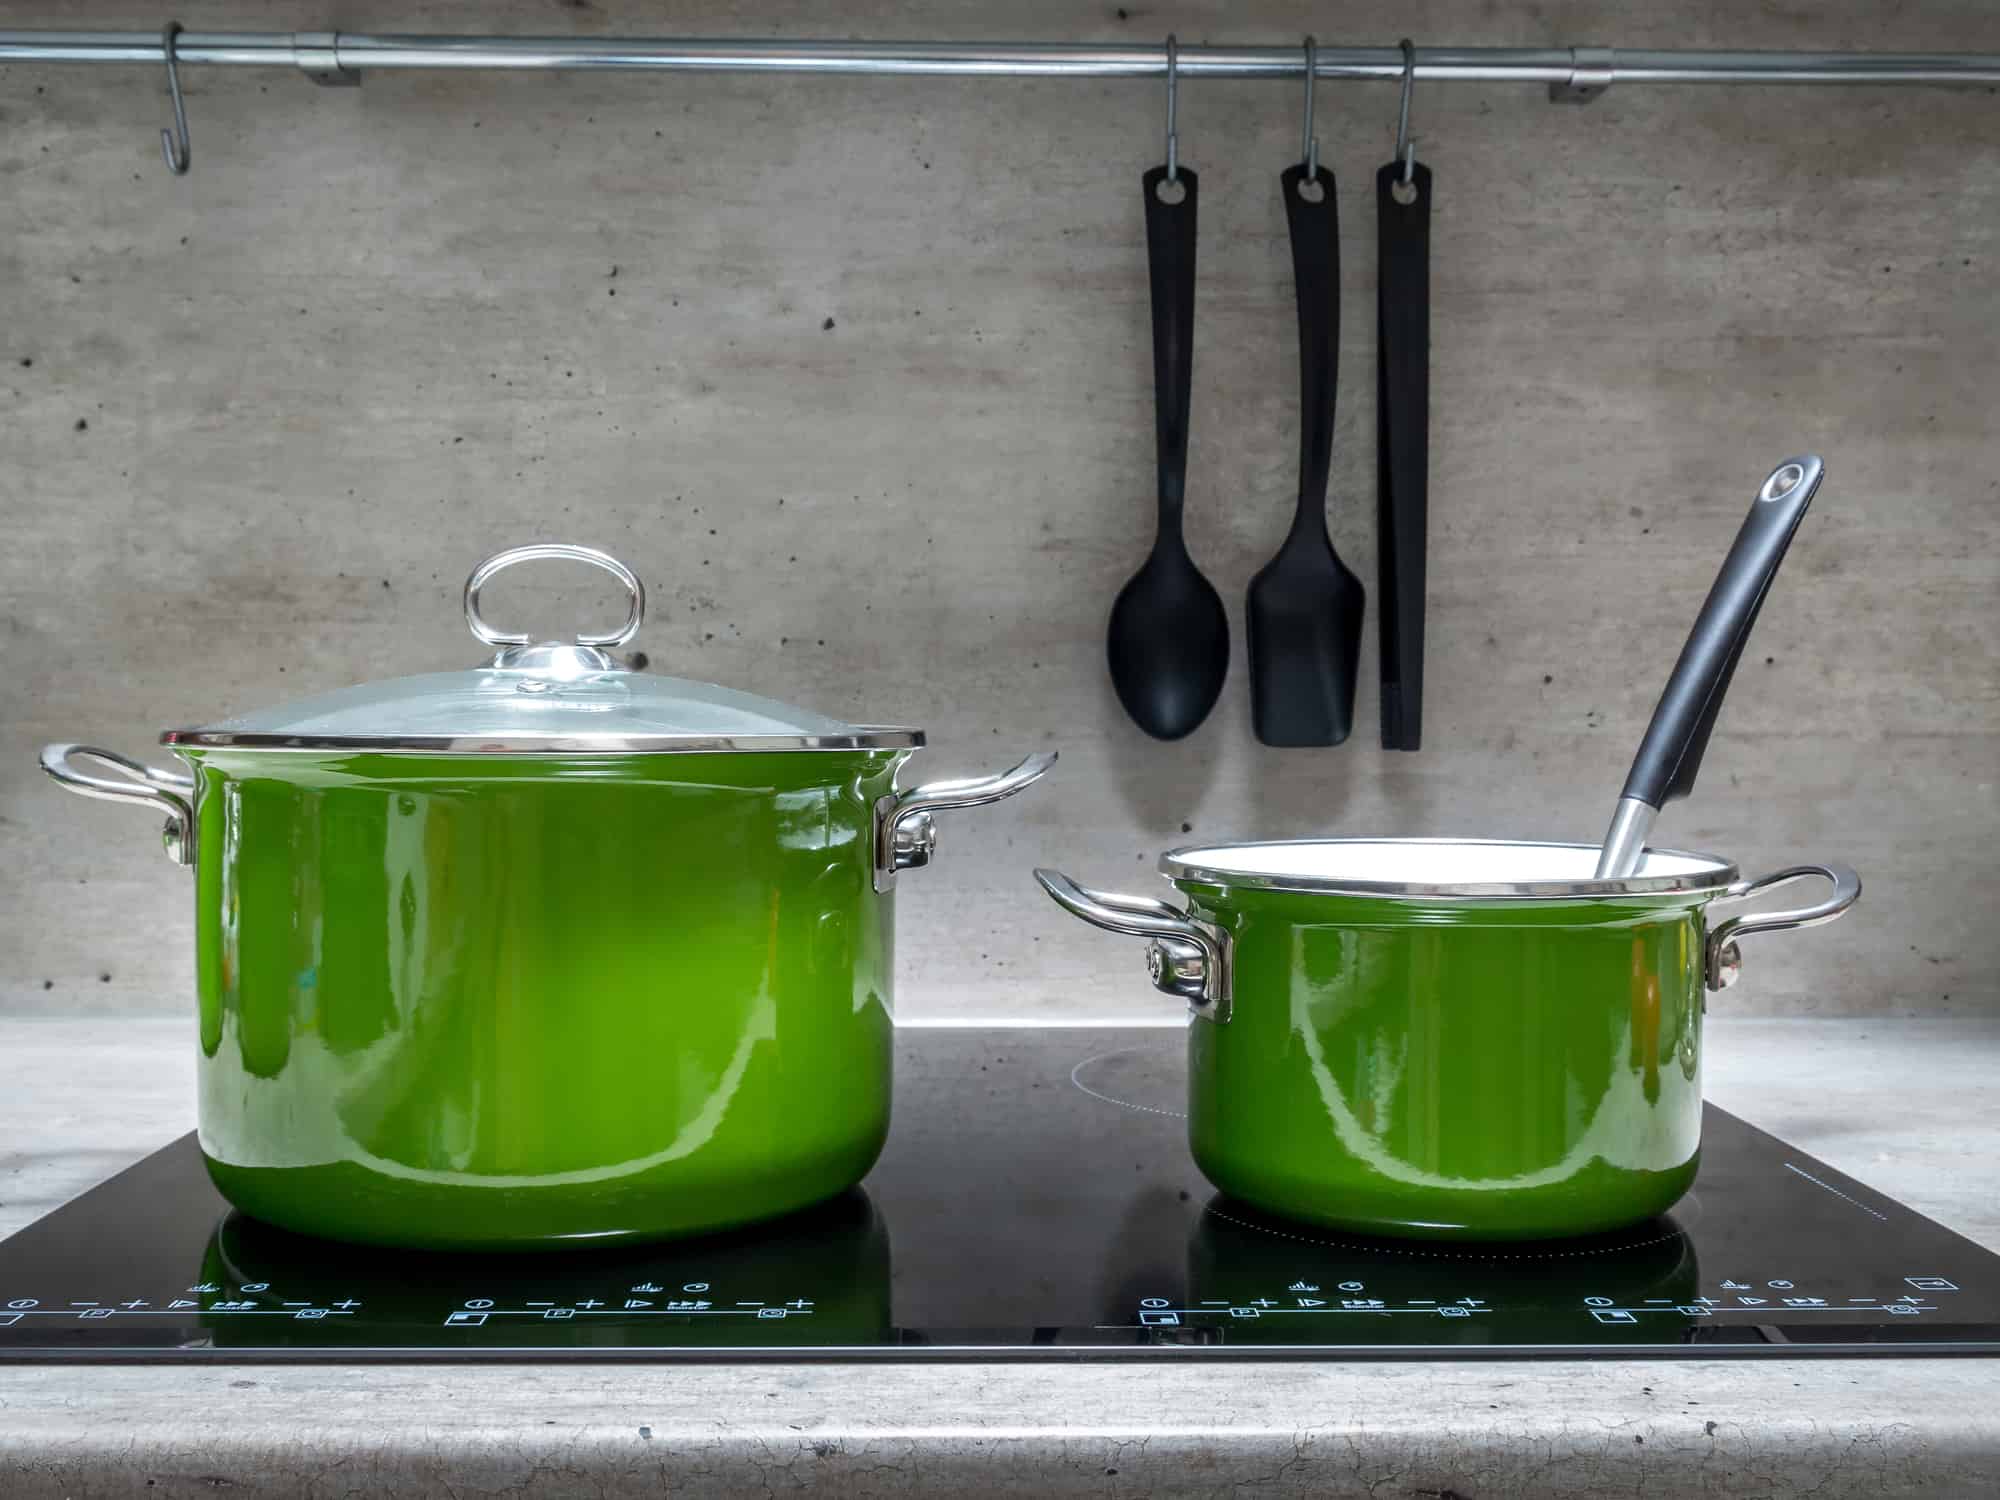 Two green enamel stewpots on black induction cooker